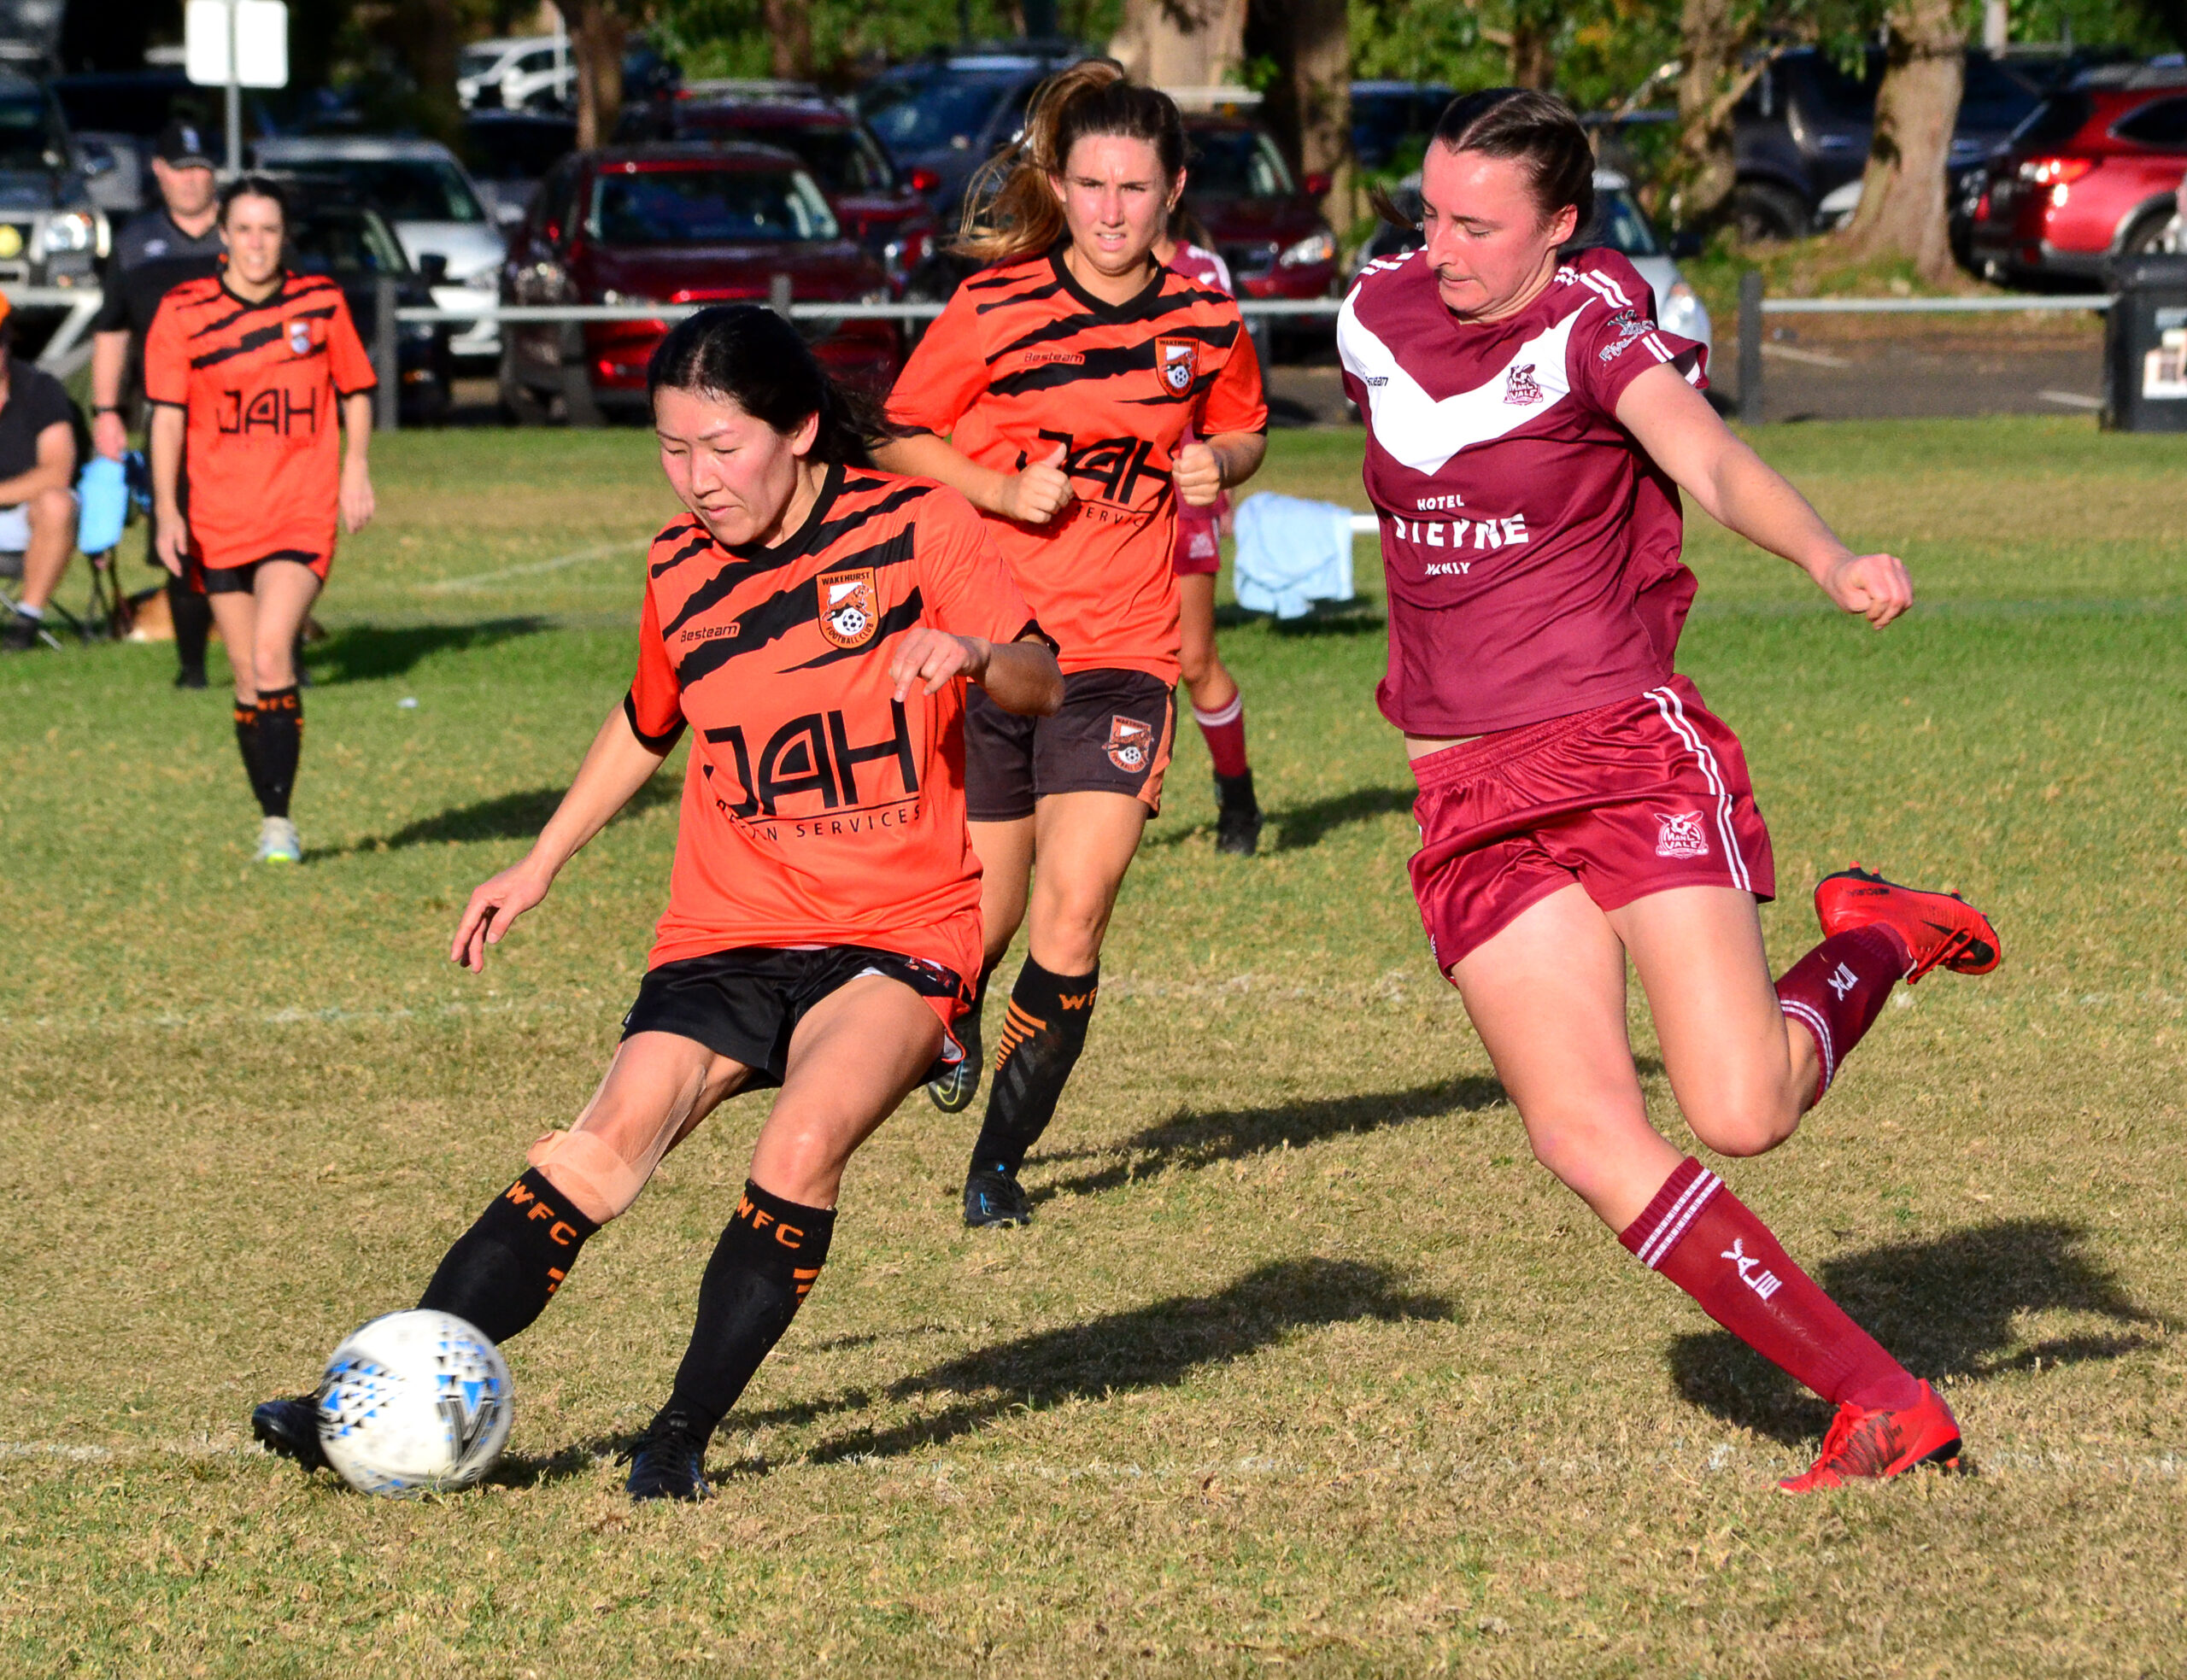 Action from the 2023 MWFA Women's Premier League Round 6 game between Manly Vale and Wakehurst. Photo credit: Graeme Bolton